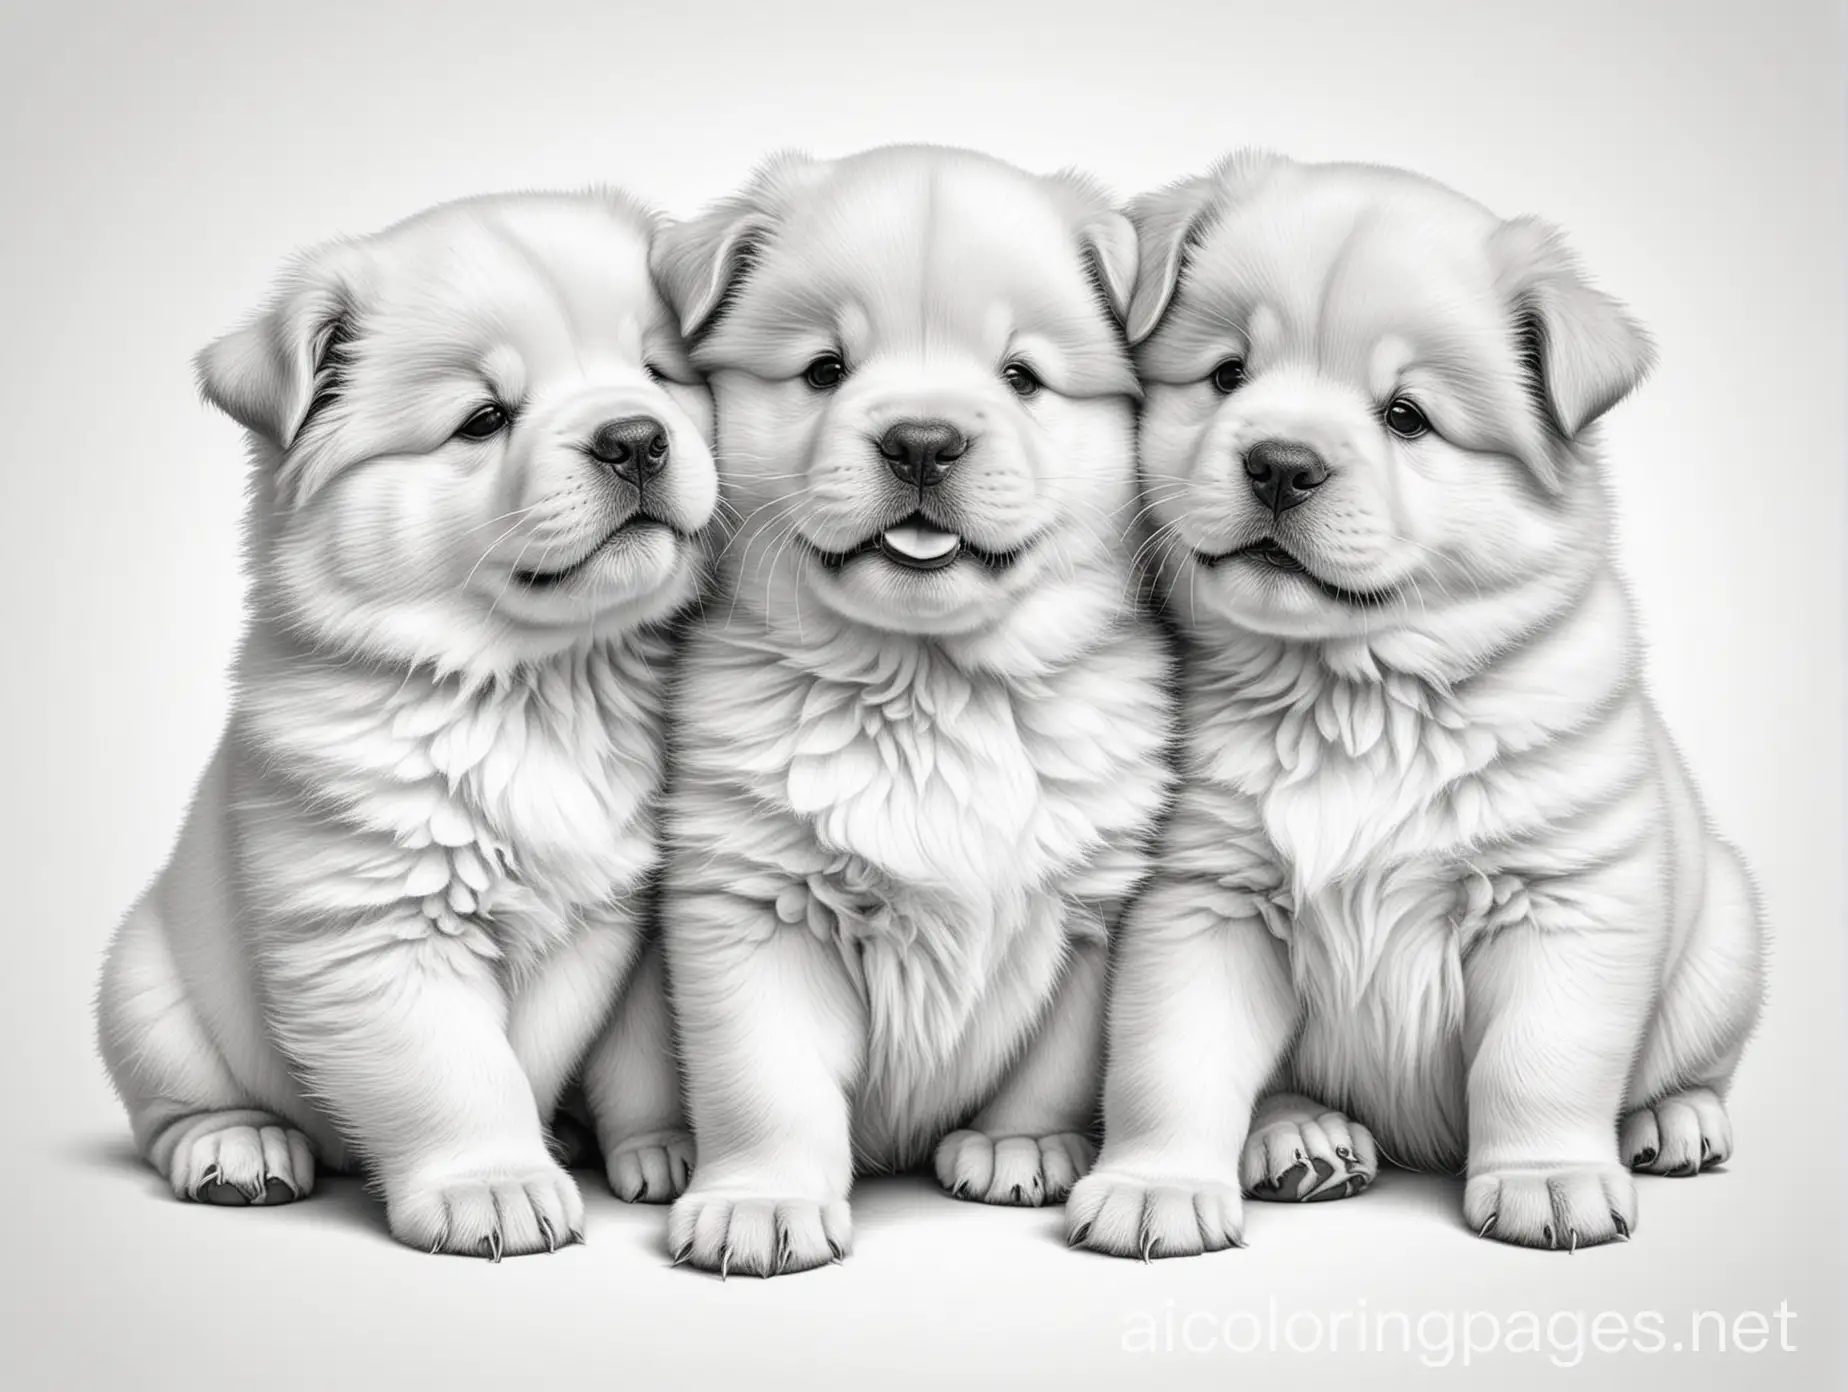 chow puppies playing together, Coloring Page, black and white, line art, white background, Simplicity, Ample White Space. The background of the coloring page is plain white to make it easy for young children to color within the lines. The outlines of all the subjects are easy to distinguish, making it simple for kids to color without too much difficulty